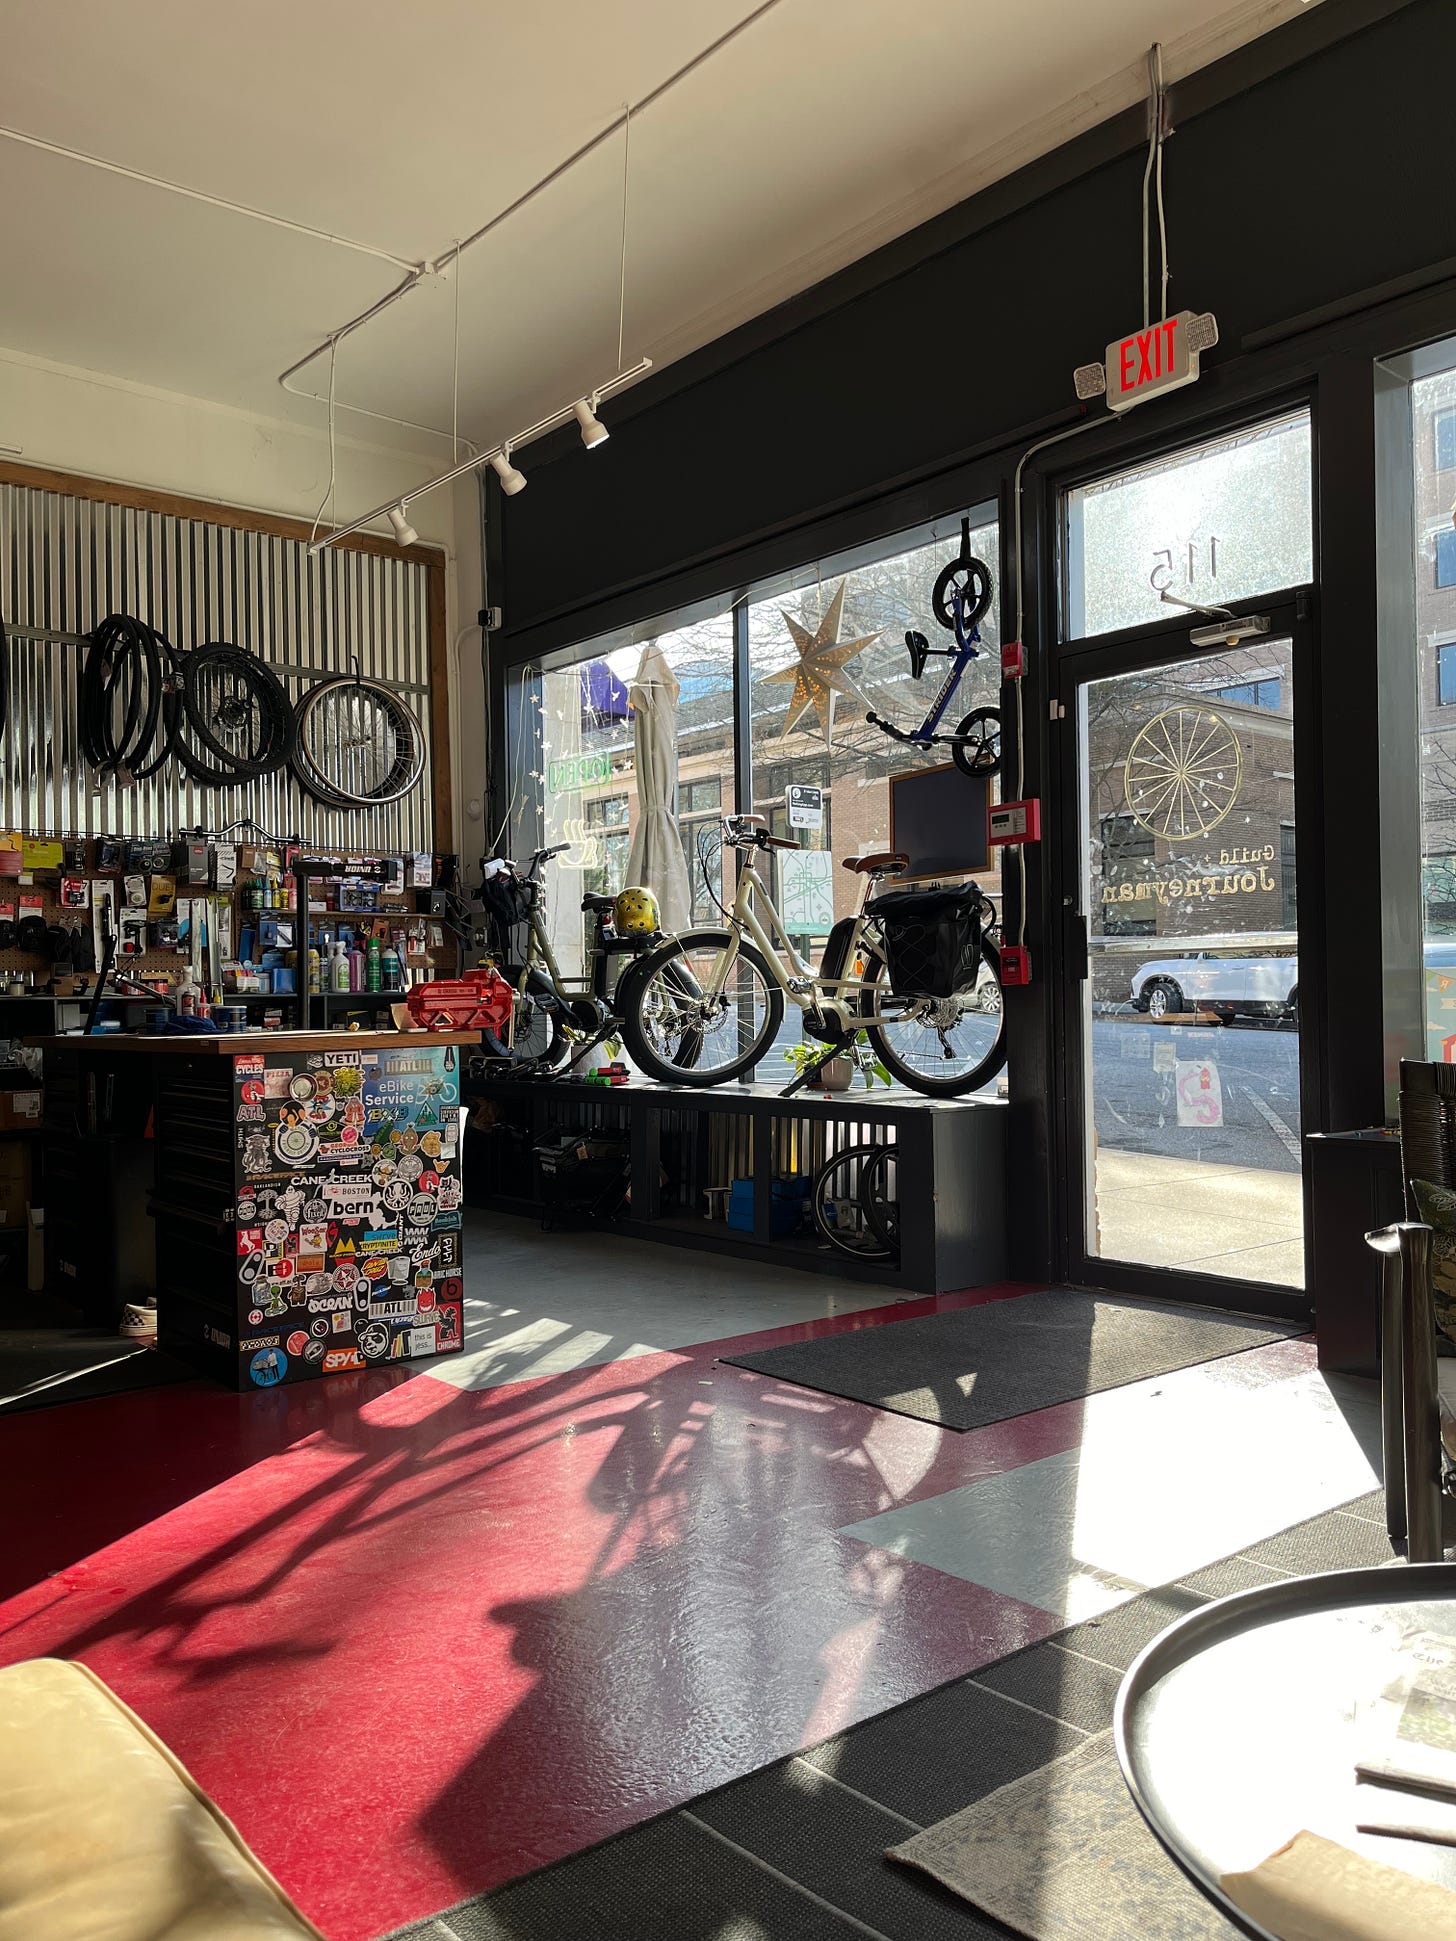 Image from inside Guild + Journeyman, showing bikes hanging on the wall and bumper stickers all over the furniture and sunlight streaming through the front windows.